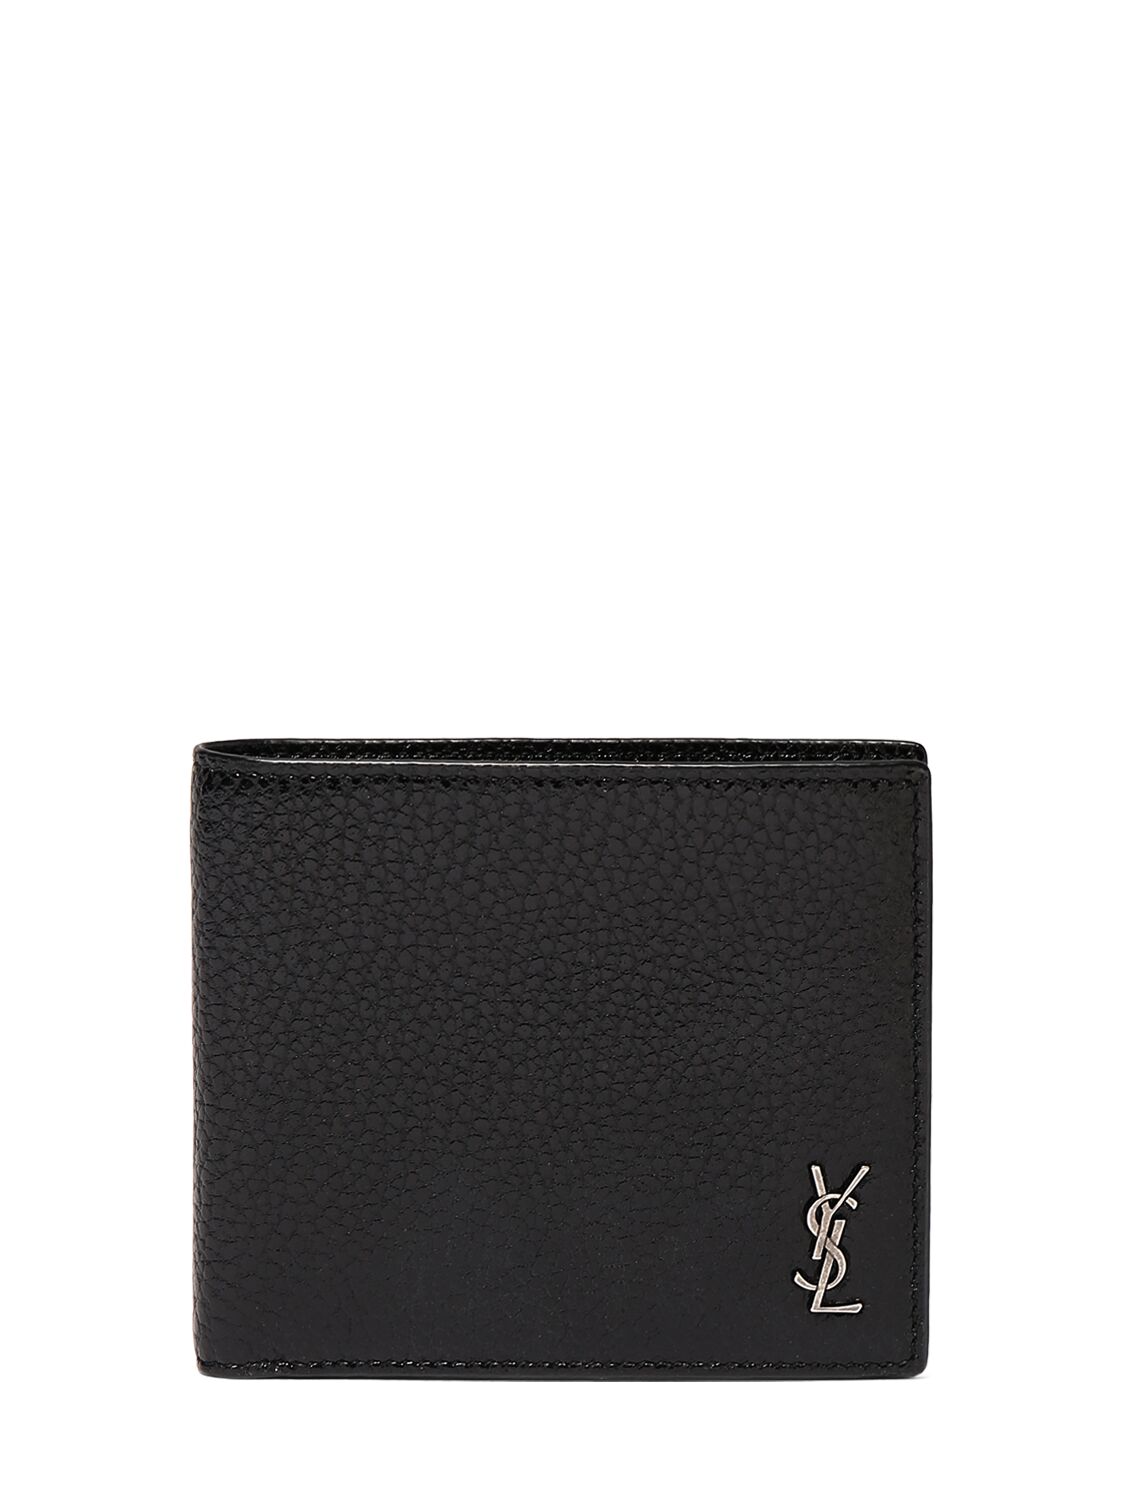 Image of East/west Leather Billfold Wallet